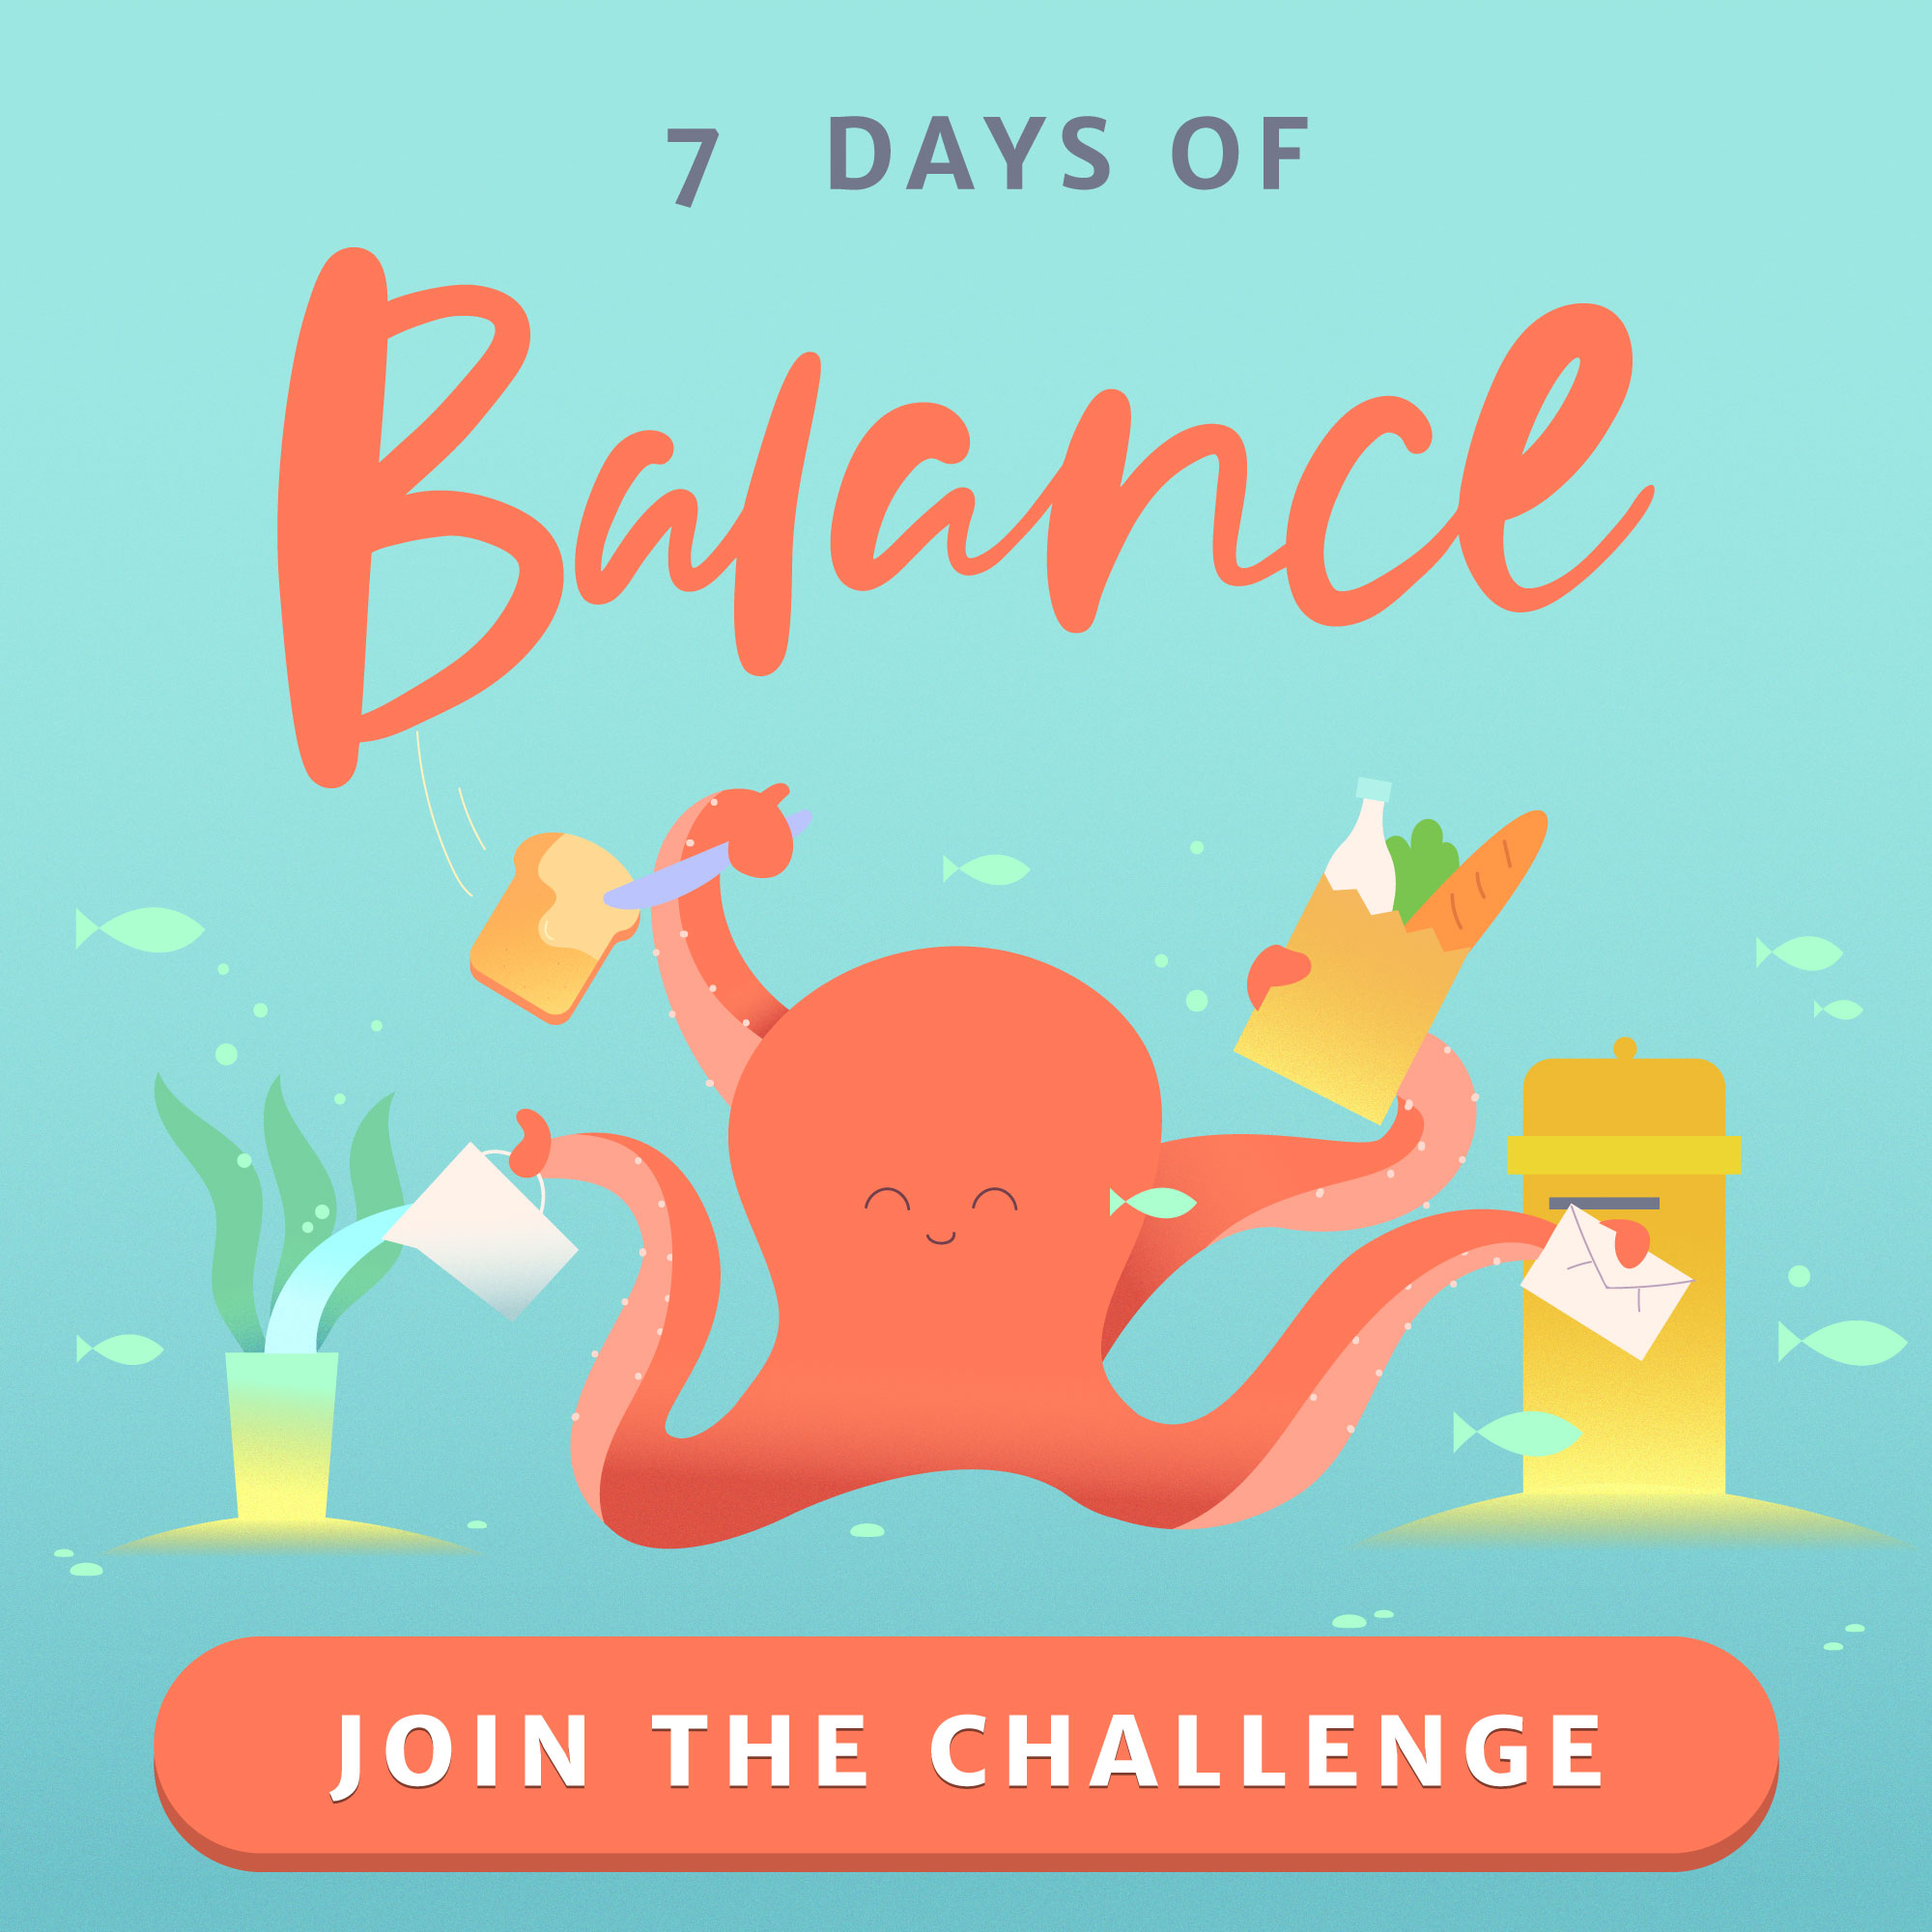 Join 7 Days of Balance